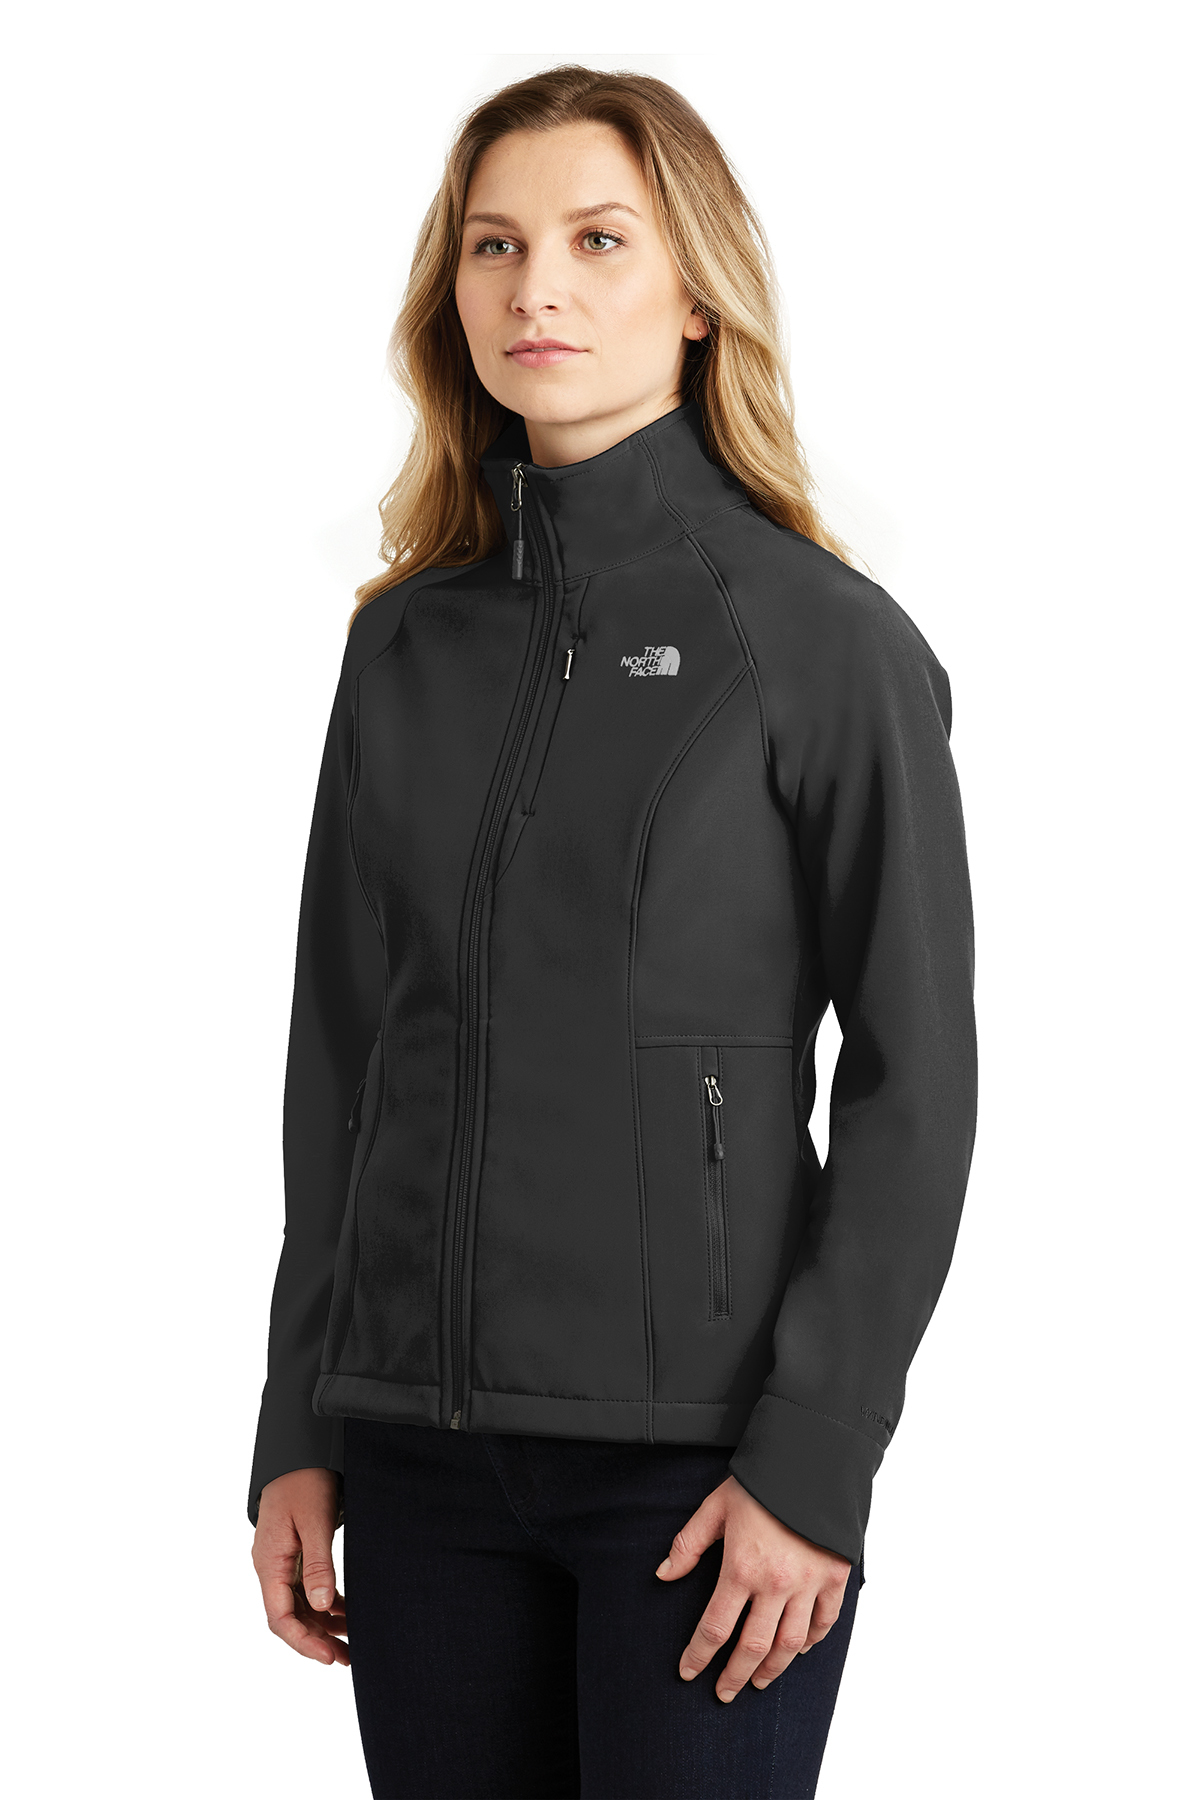 The North Face ® Ladies Apex Barrier Soft Shell Jacket | Product ...